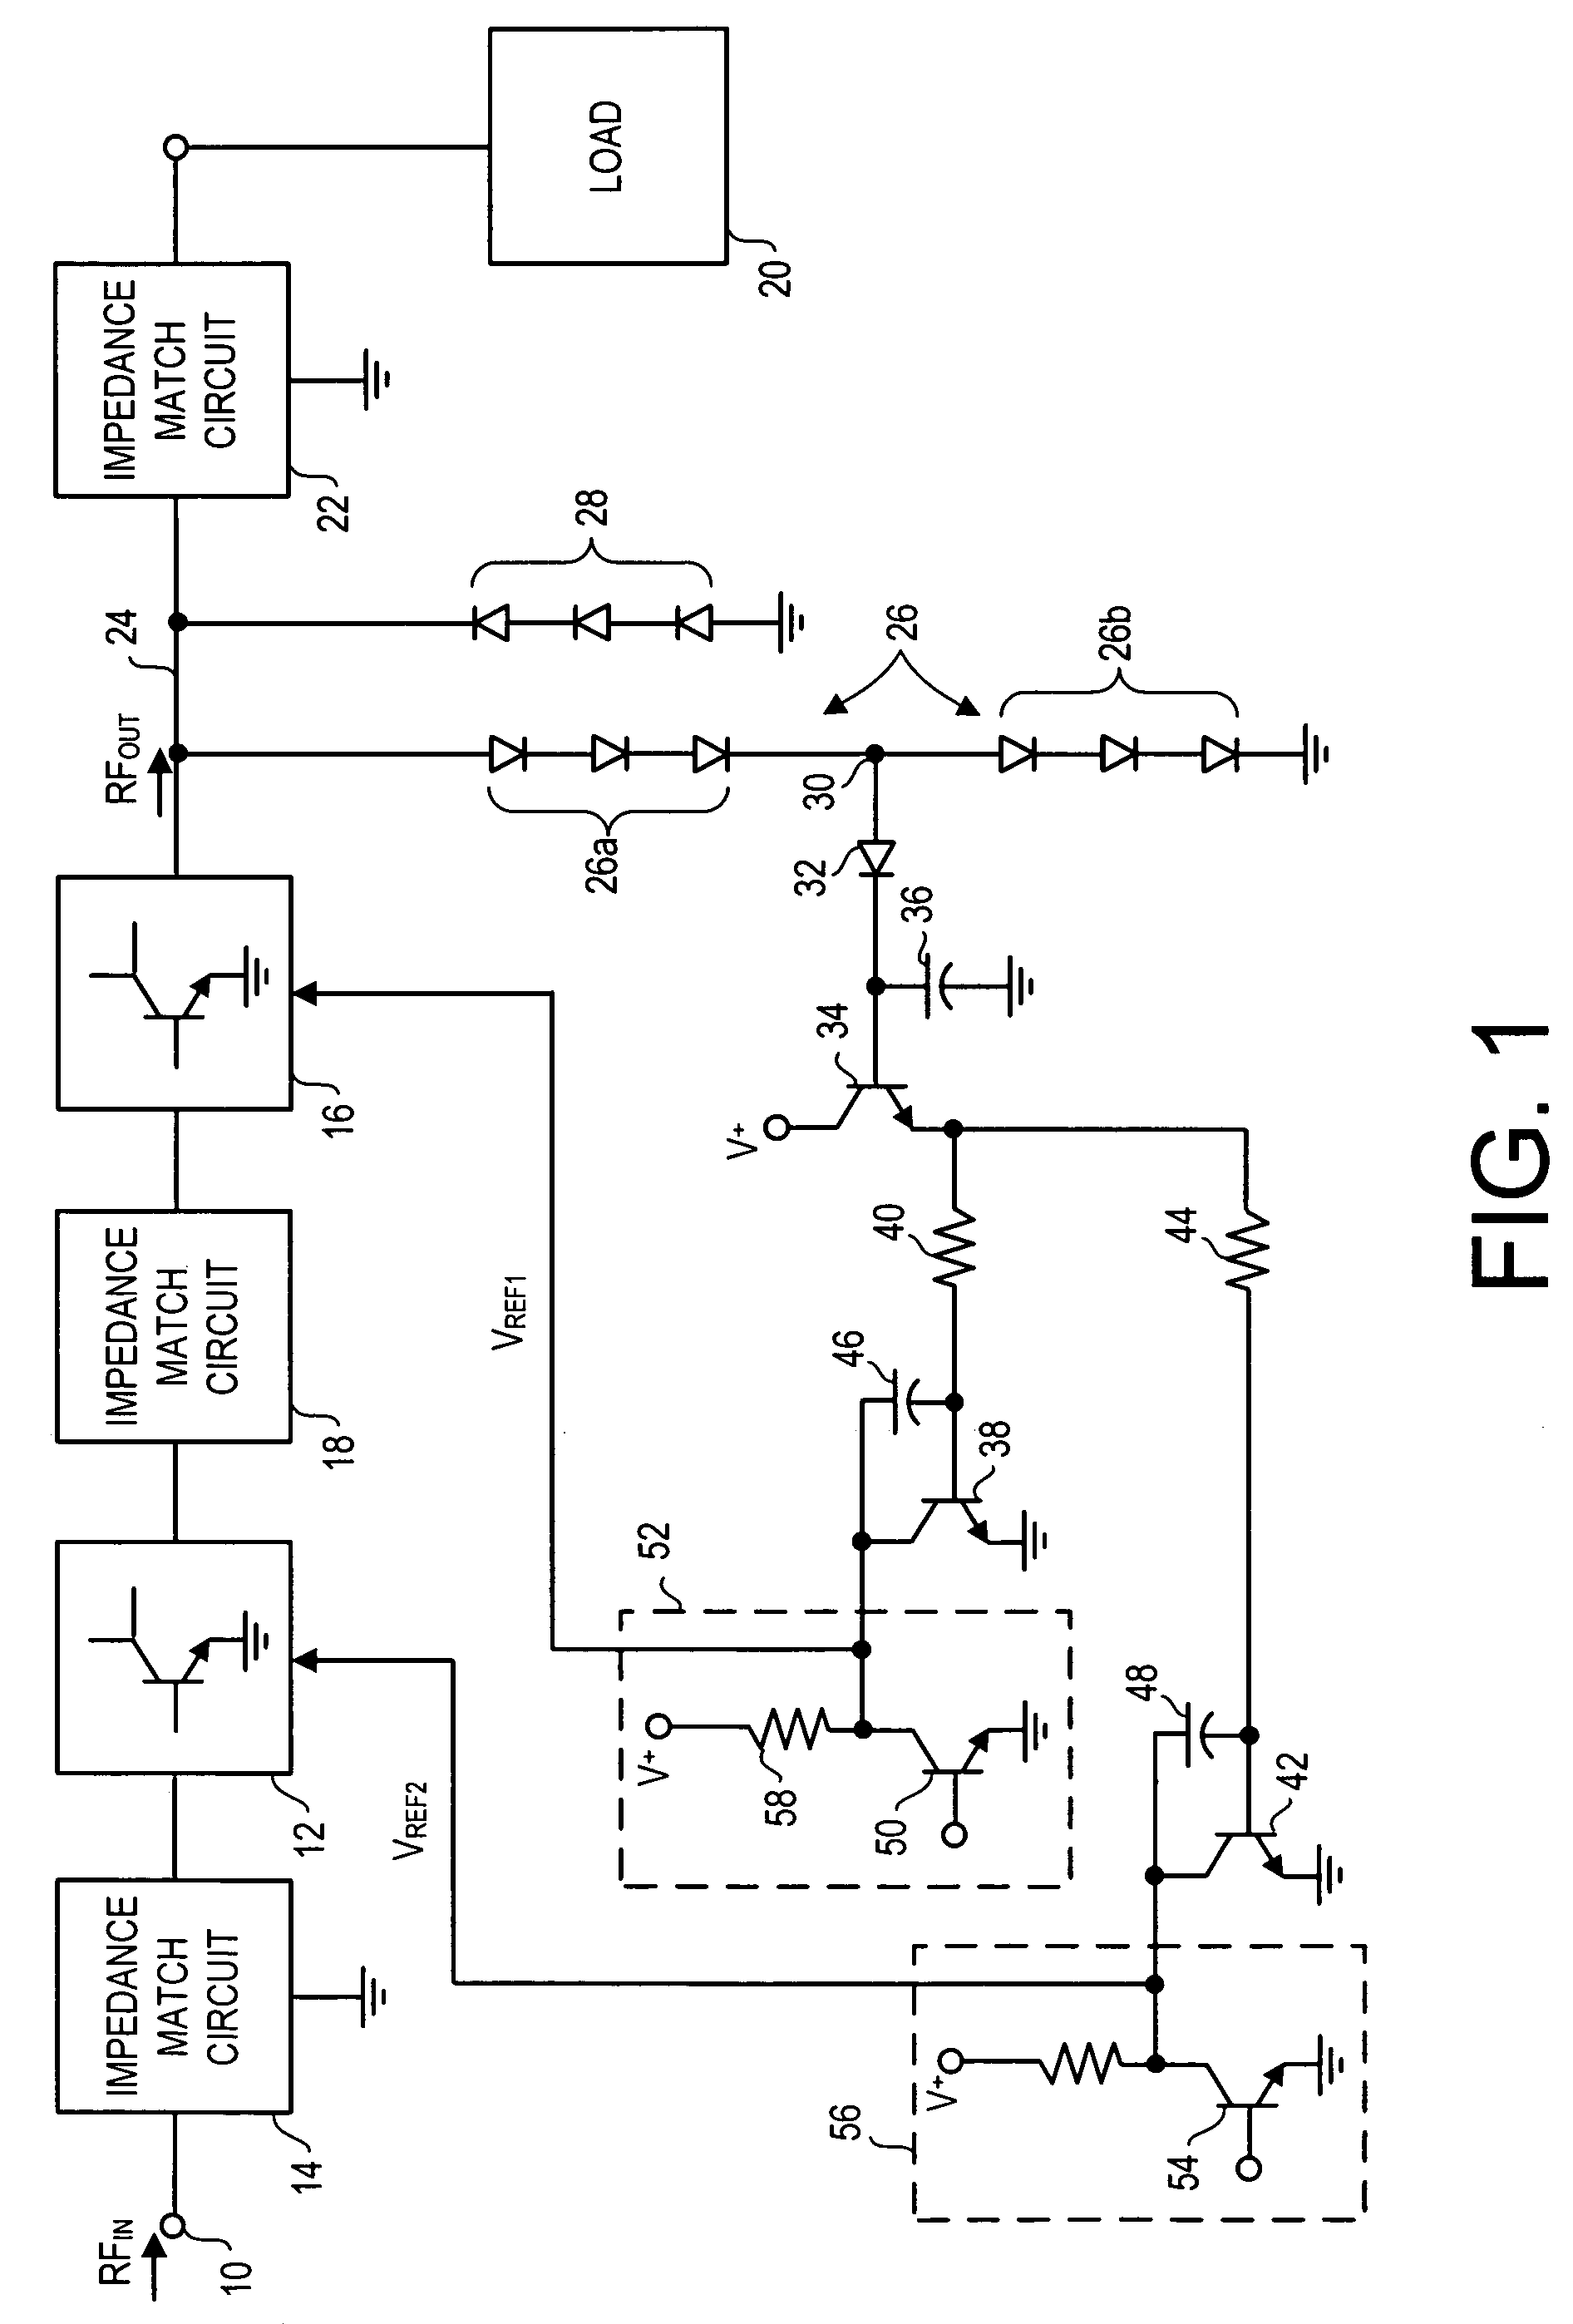 Active protection circuit for load mismatched power amplifier